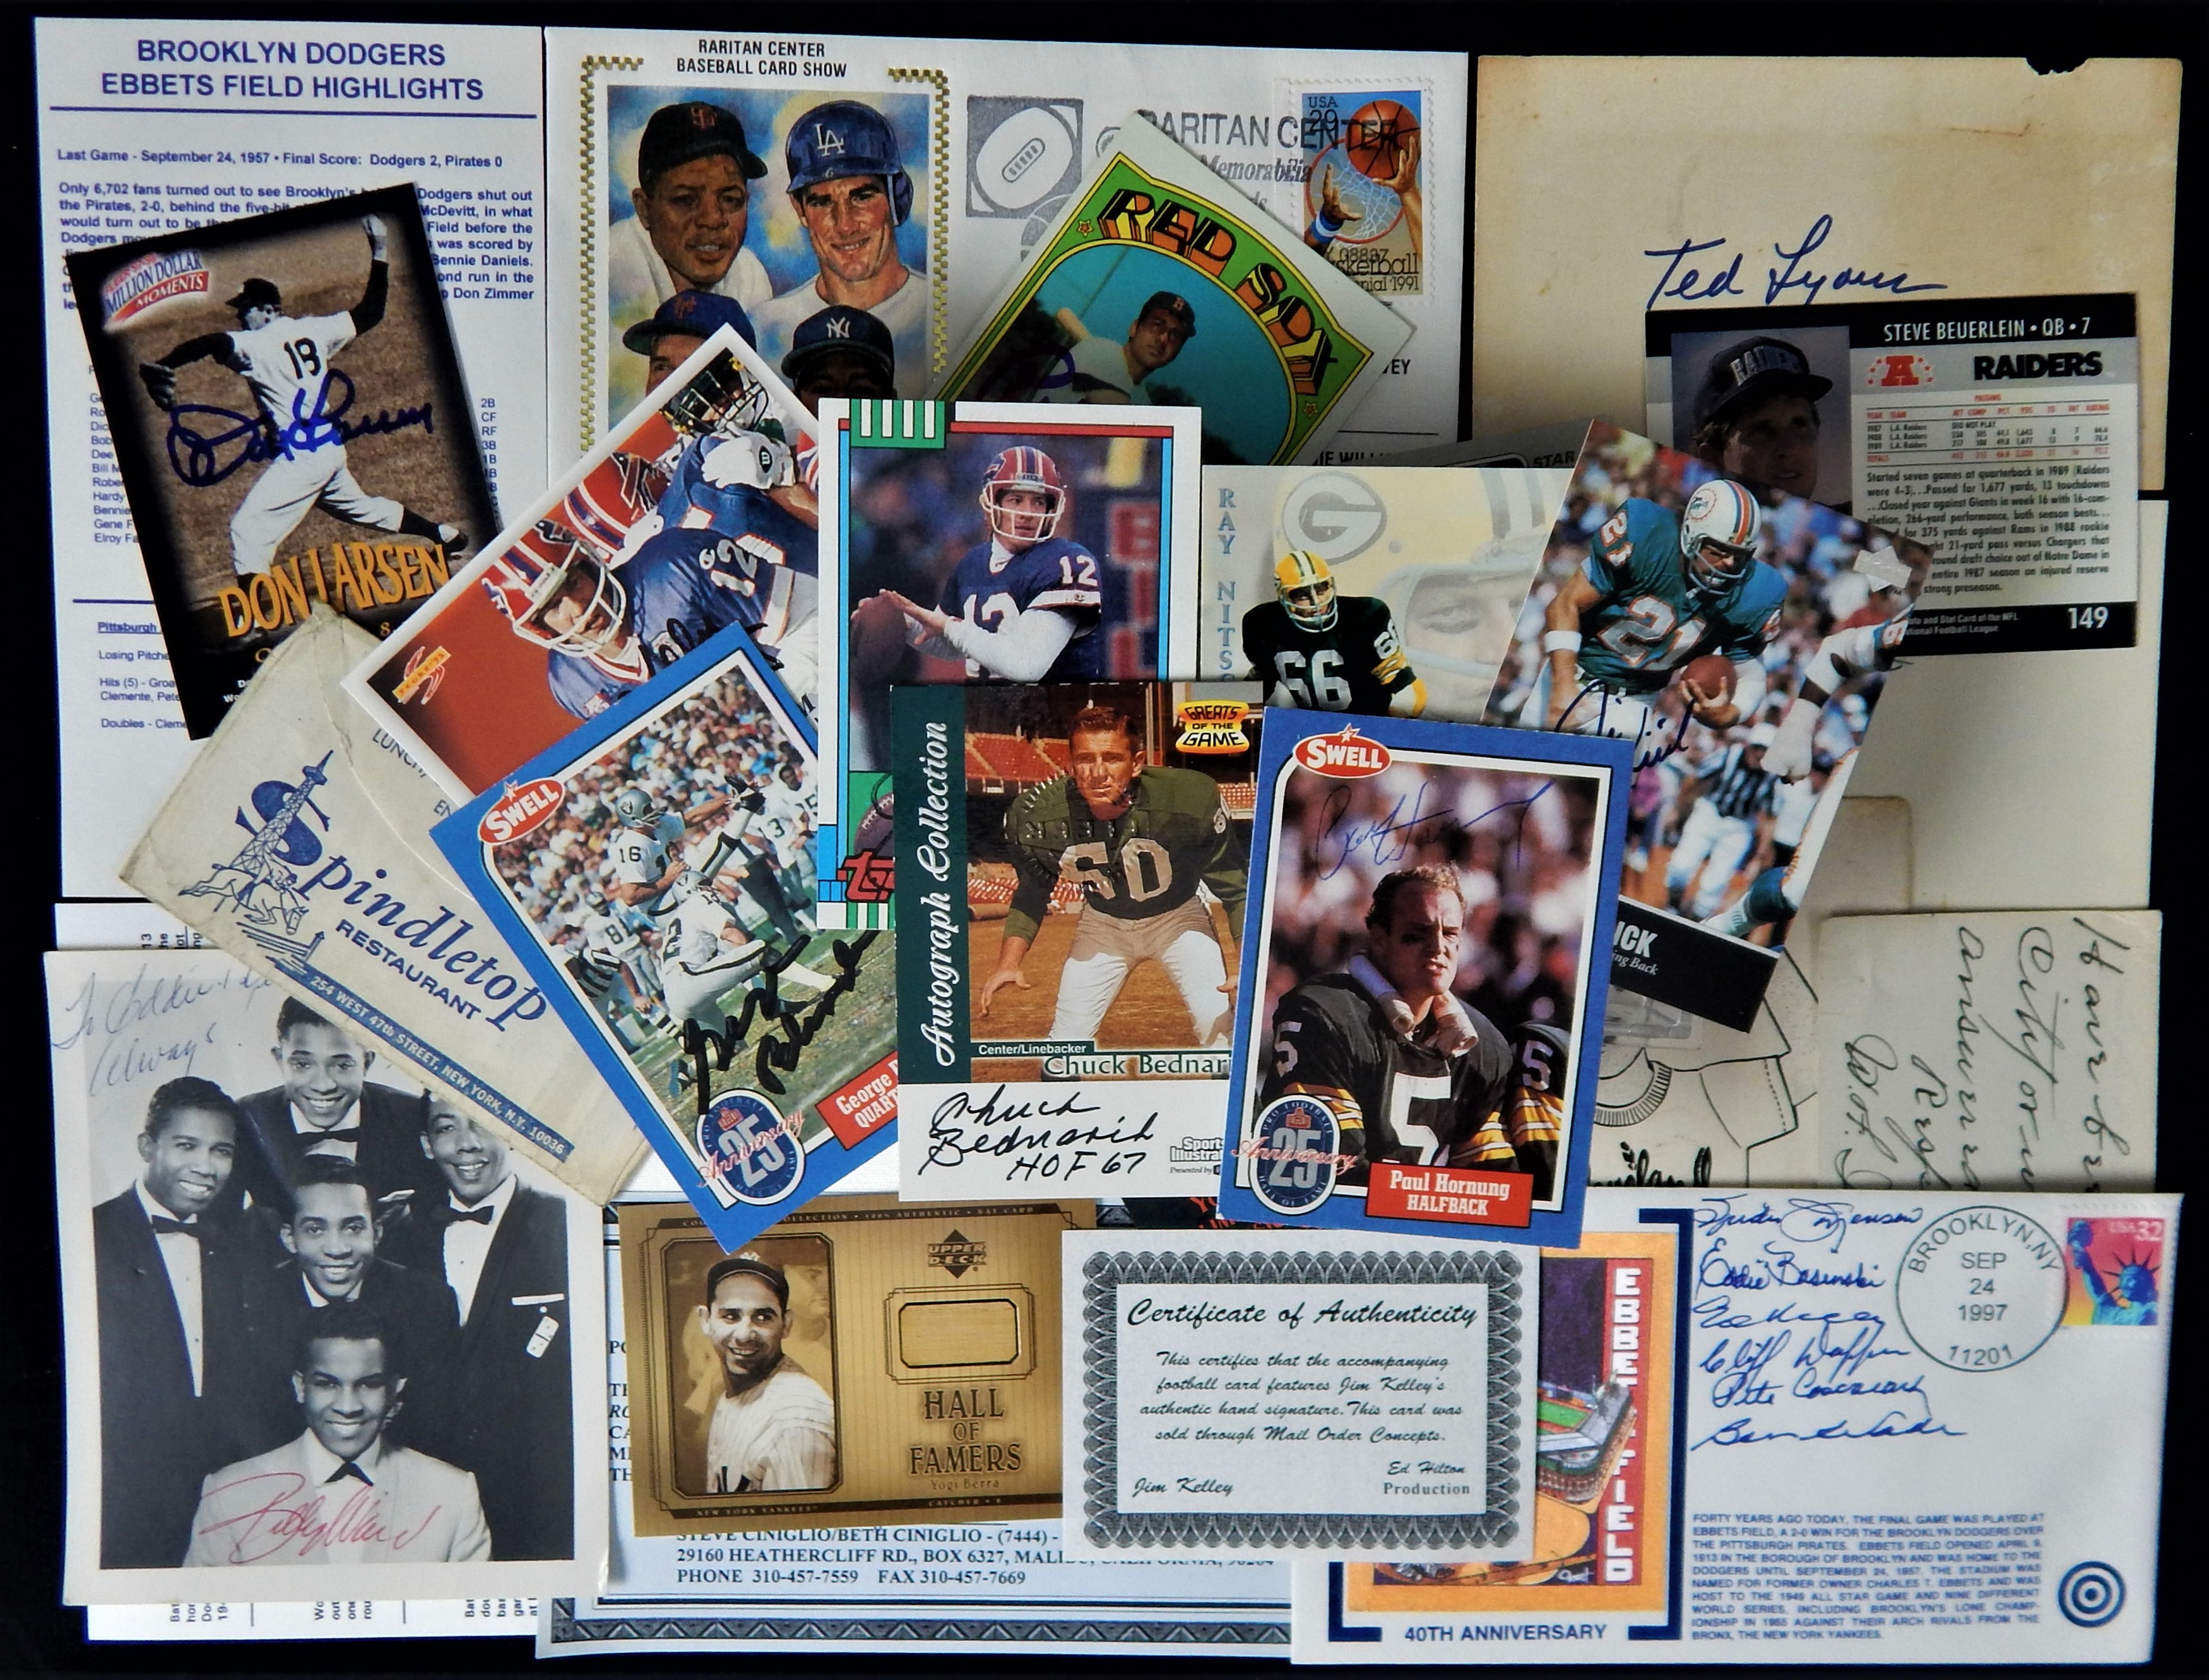 Baseball Autographs - Large Sports Card and Autographed Memorabilia Collection